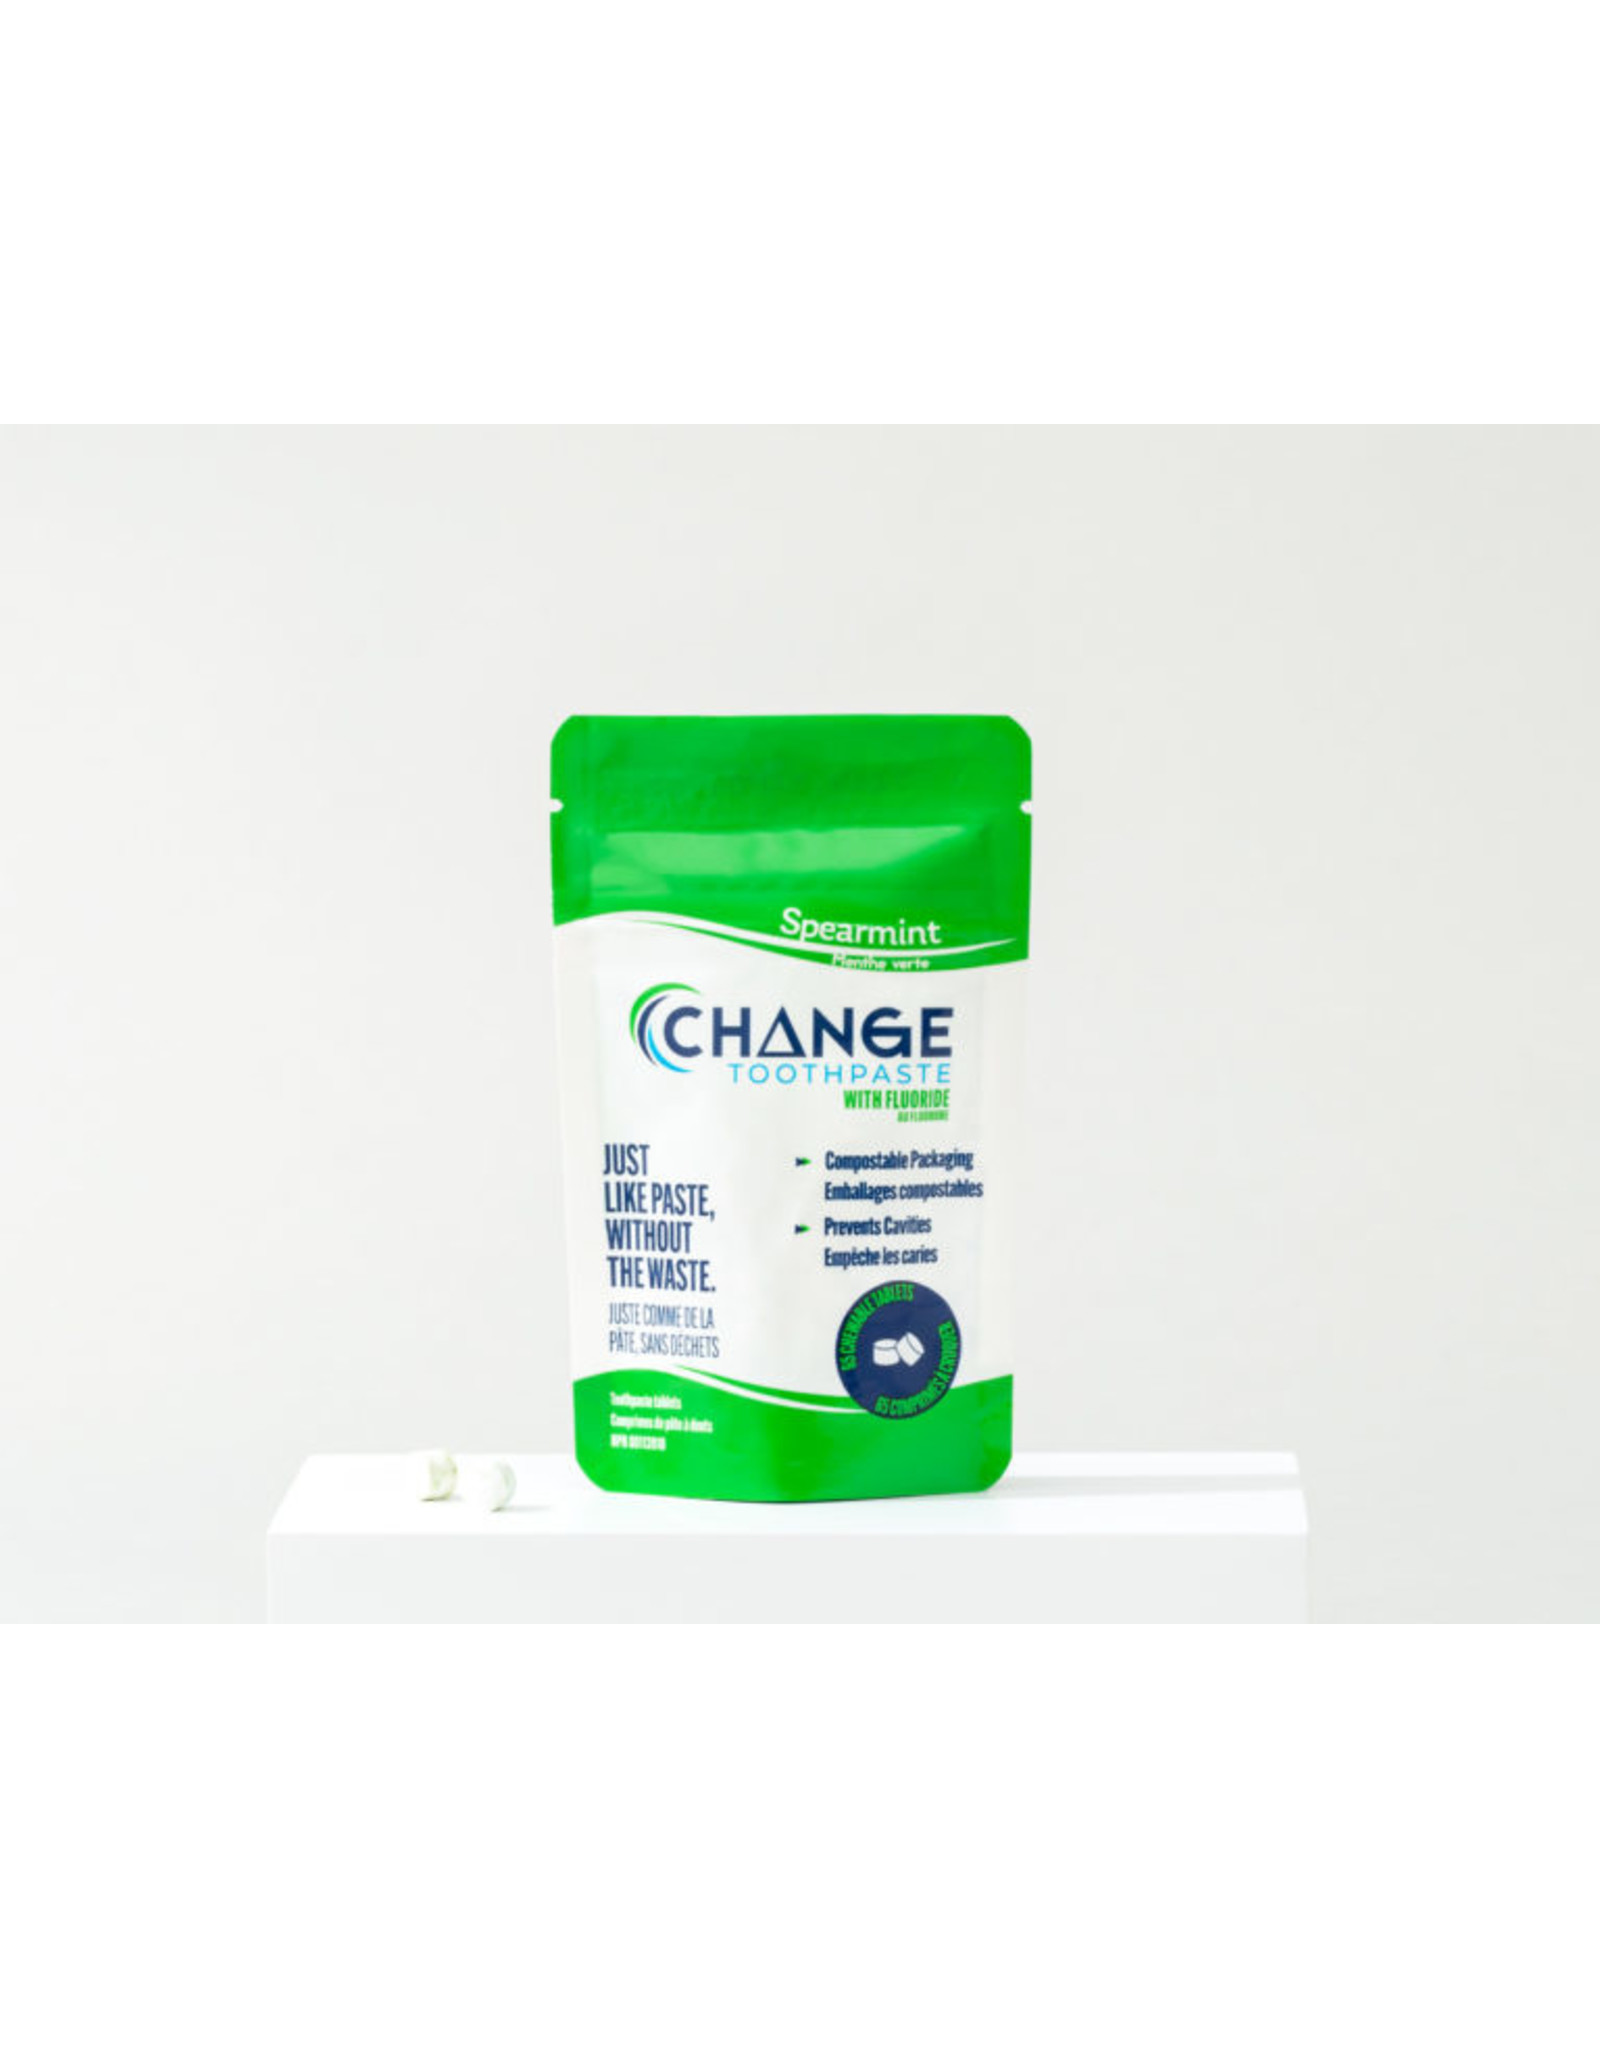 CHANGE Toothpaste Toothpaste Tablets by CHANGE Toothpaste